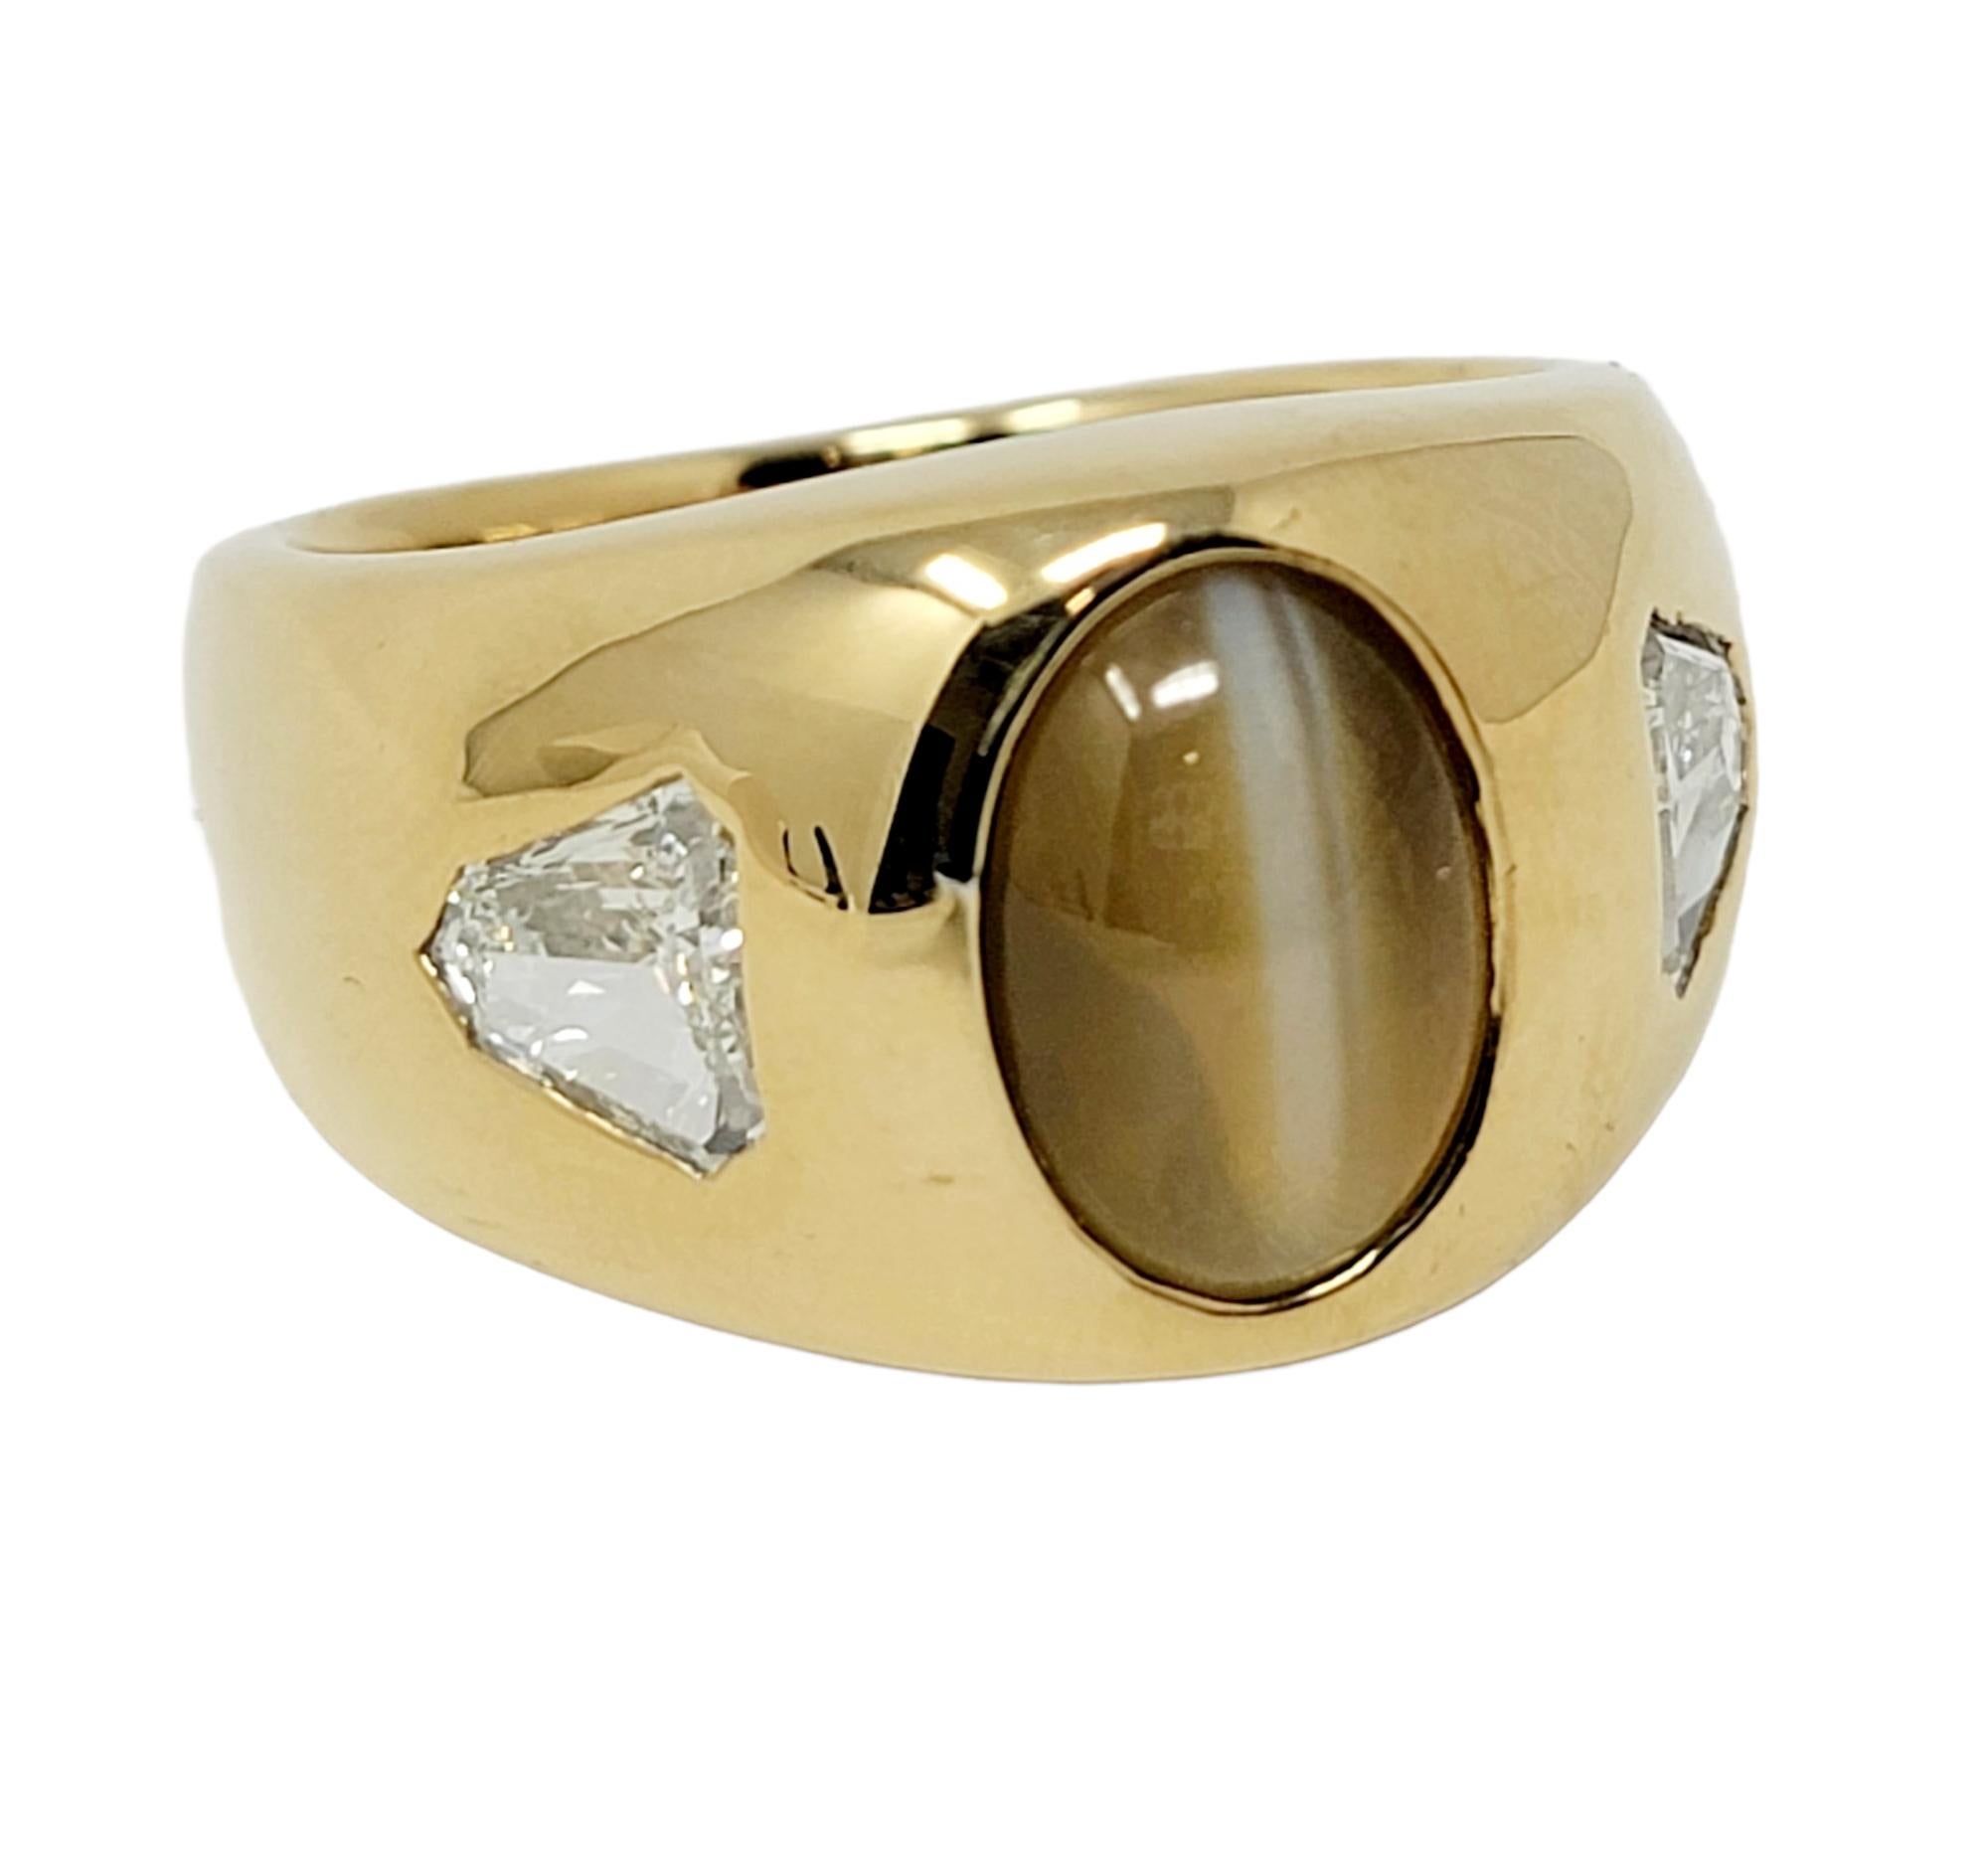 This bold, contemporary cat's eye chrysoberyl and diamond band ring will not go unnoticed! The incredible 8.86 carat oval cabochon chrysoberyl stone is bezel set in 18 karat yellow gold at the center of the piece and arranged in a vertical layout.